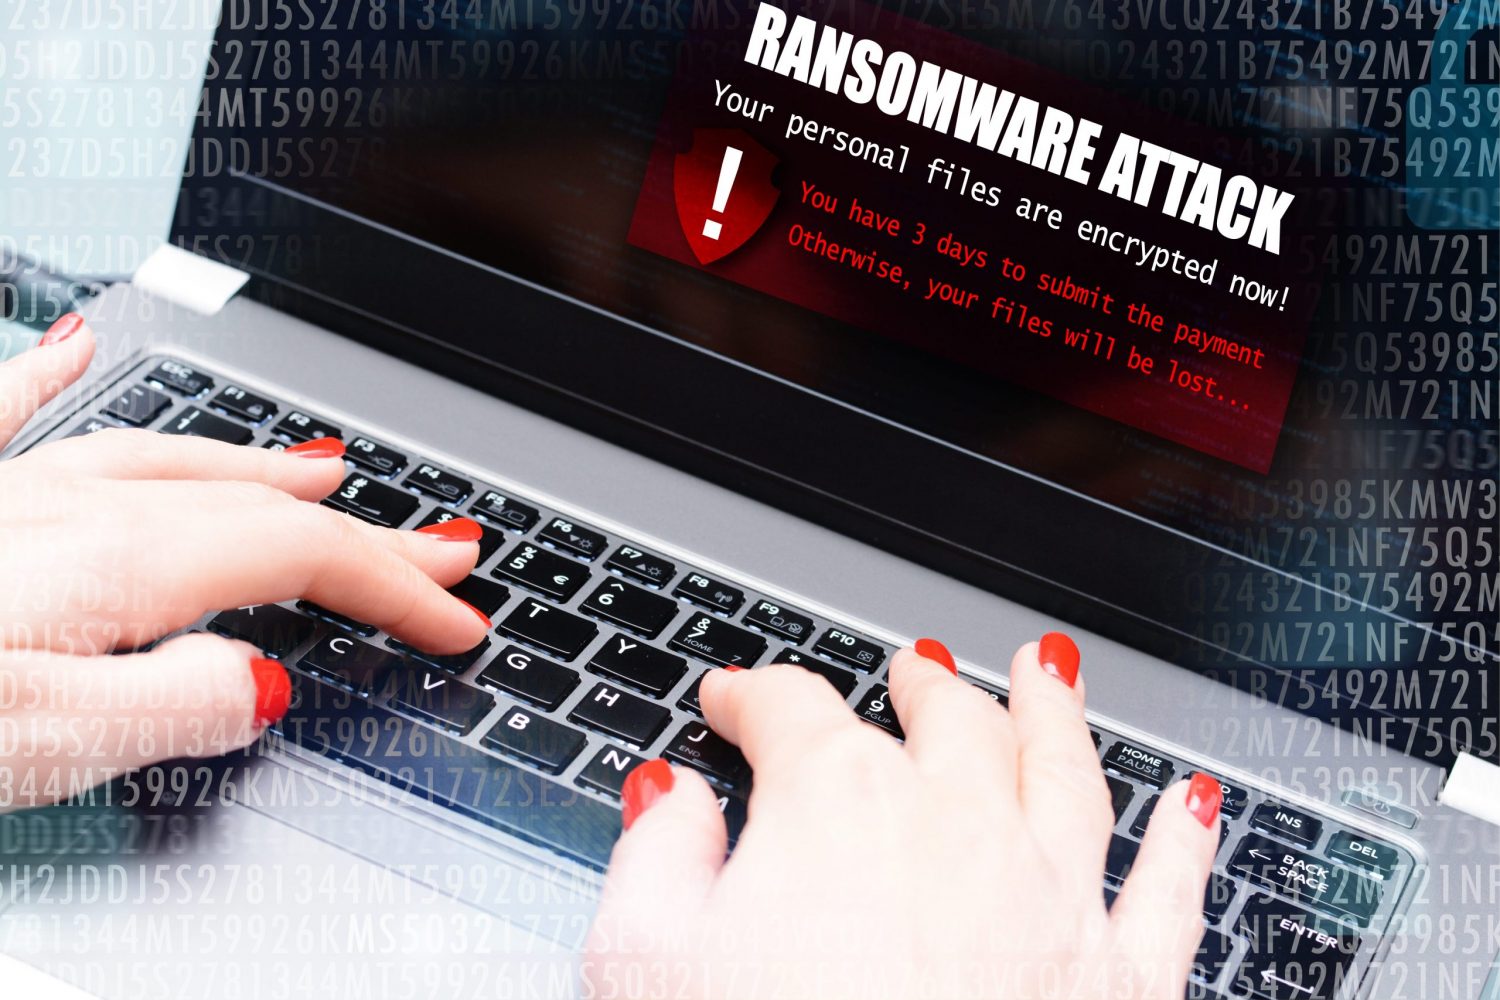 UPDATE OF A NEW PERMANENT LOCKDOWN RANSOMWARE CAMPAIGN